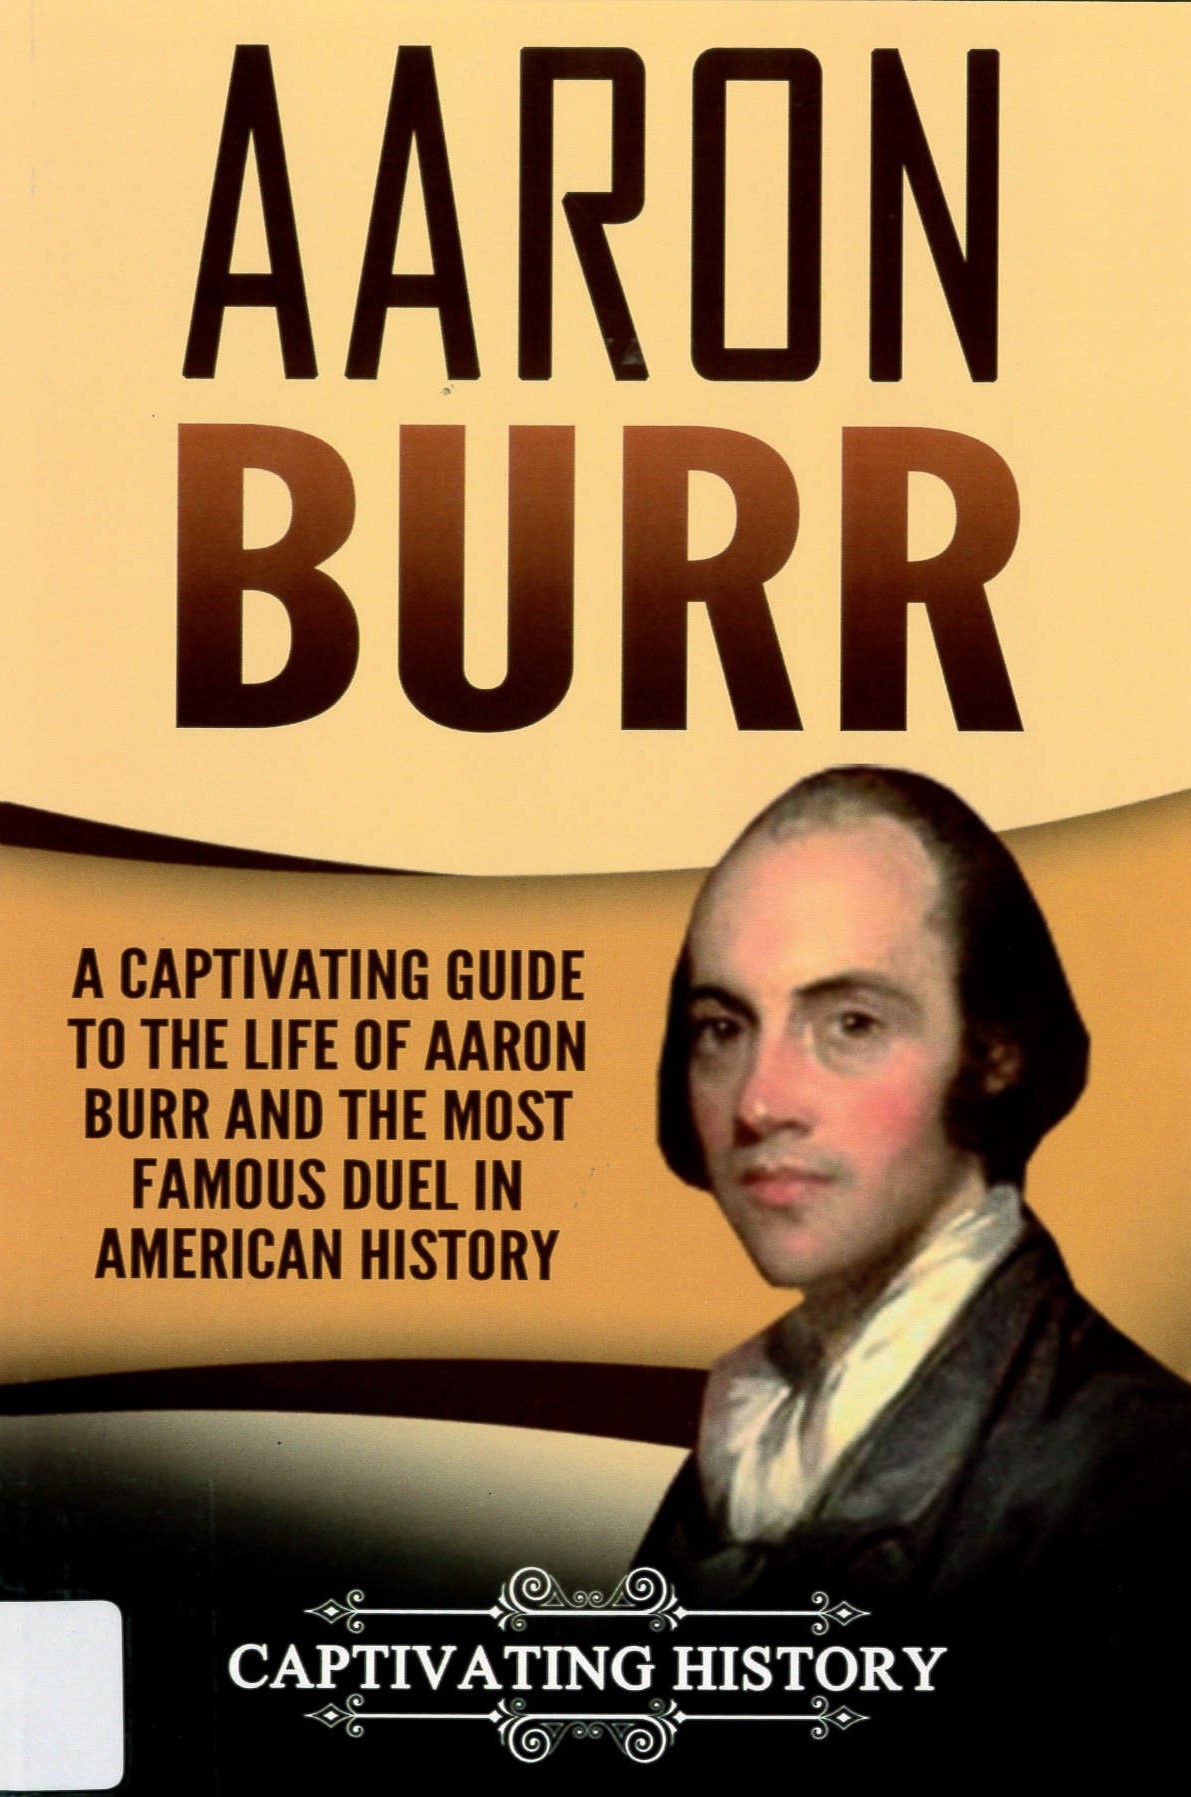 Aaron Burr : A Captivating Guide to the Life of Aaron Burr and the Most Famous Duel in American History.